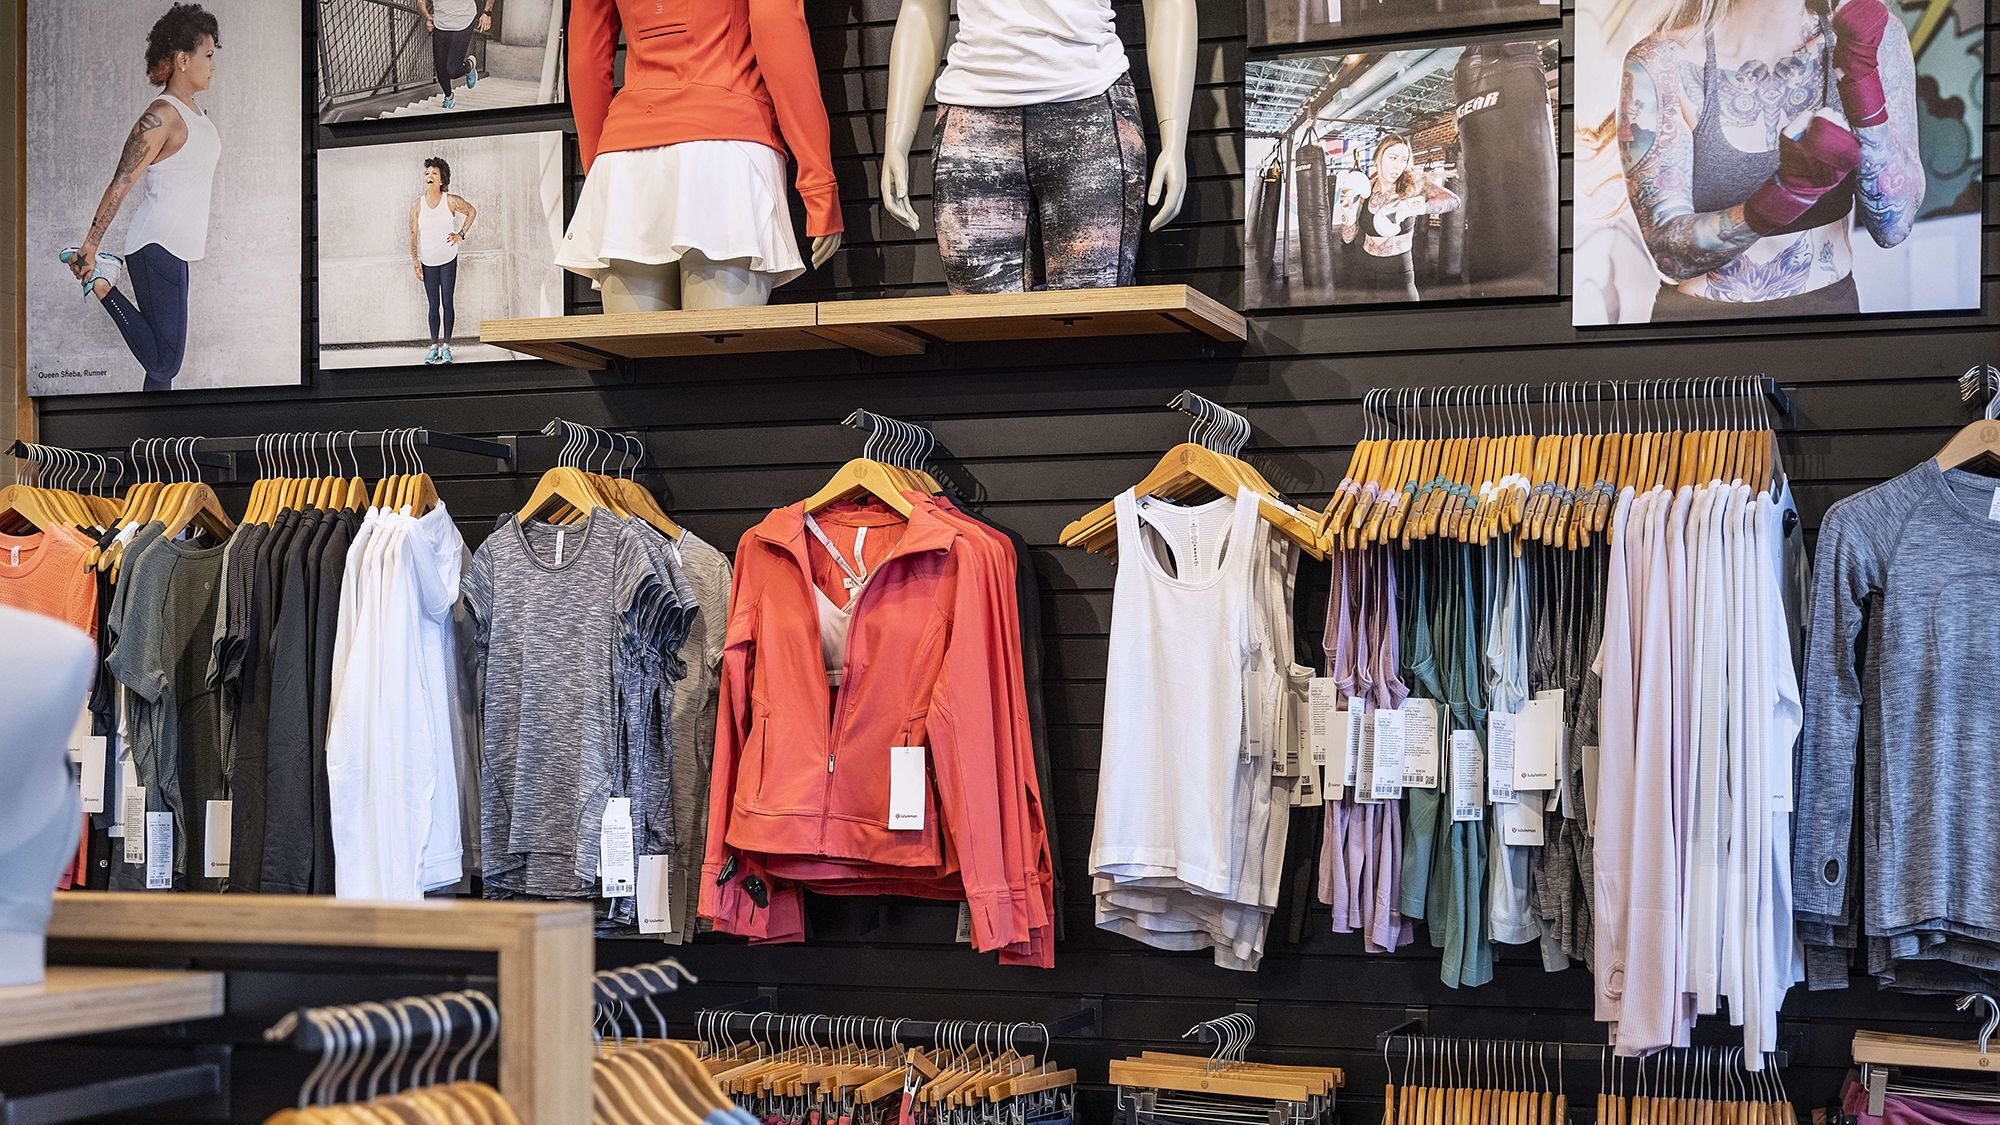 Lululemon’s (LULU) CEO Calvin McDonald said the retailer stands by its decision to fire two emplo...